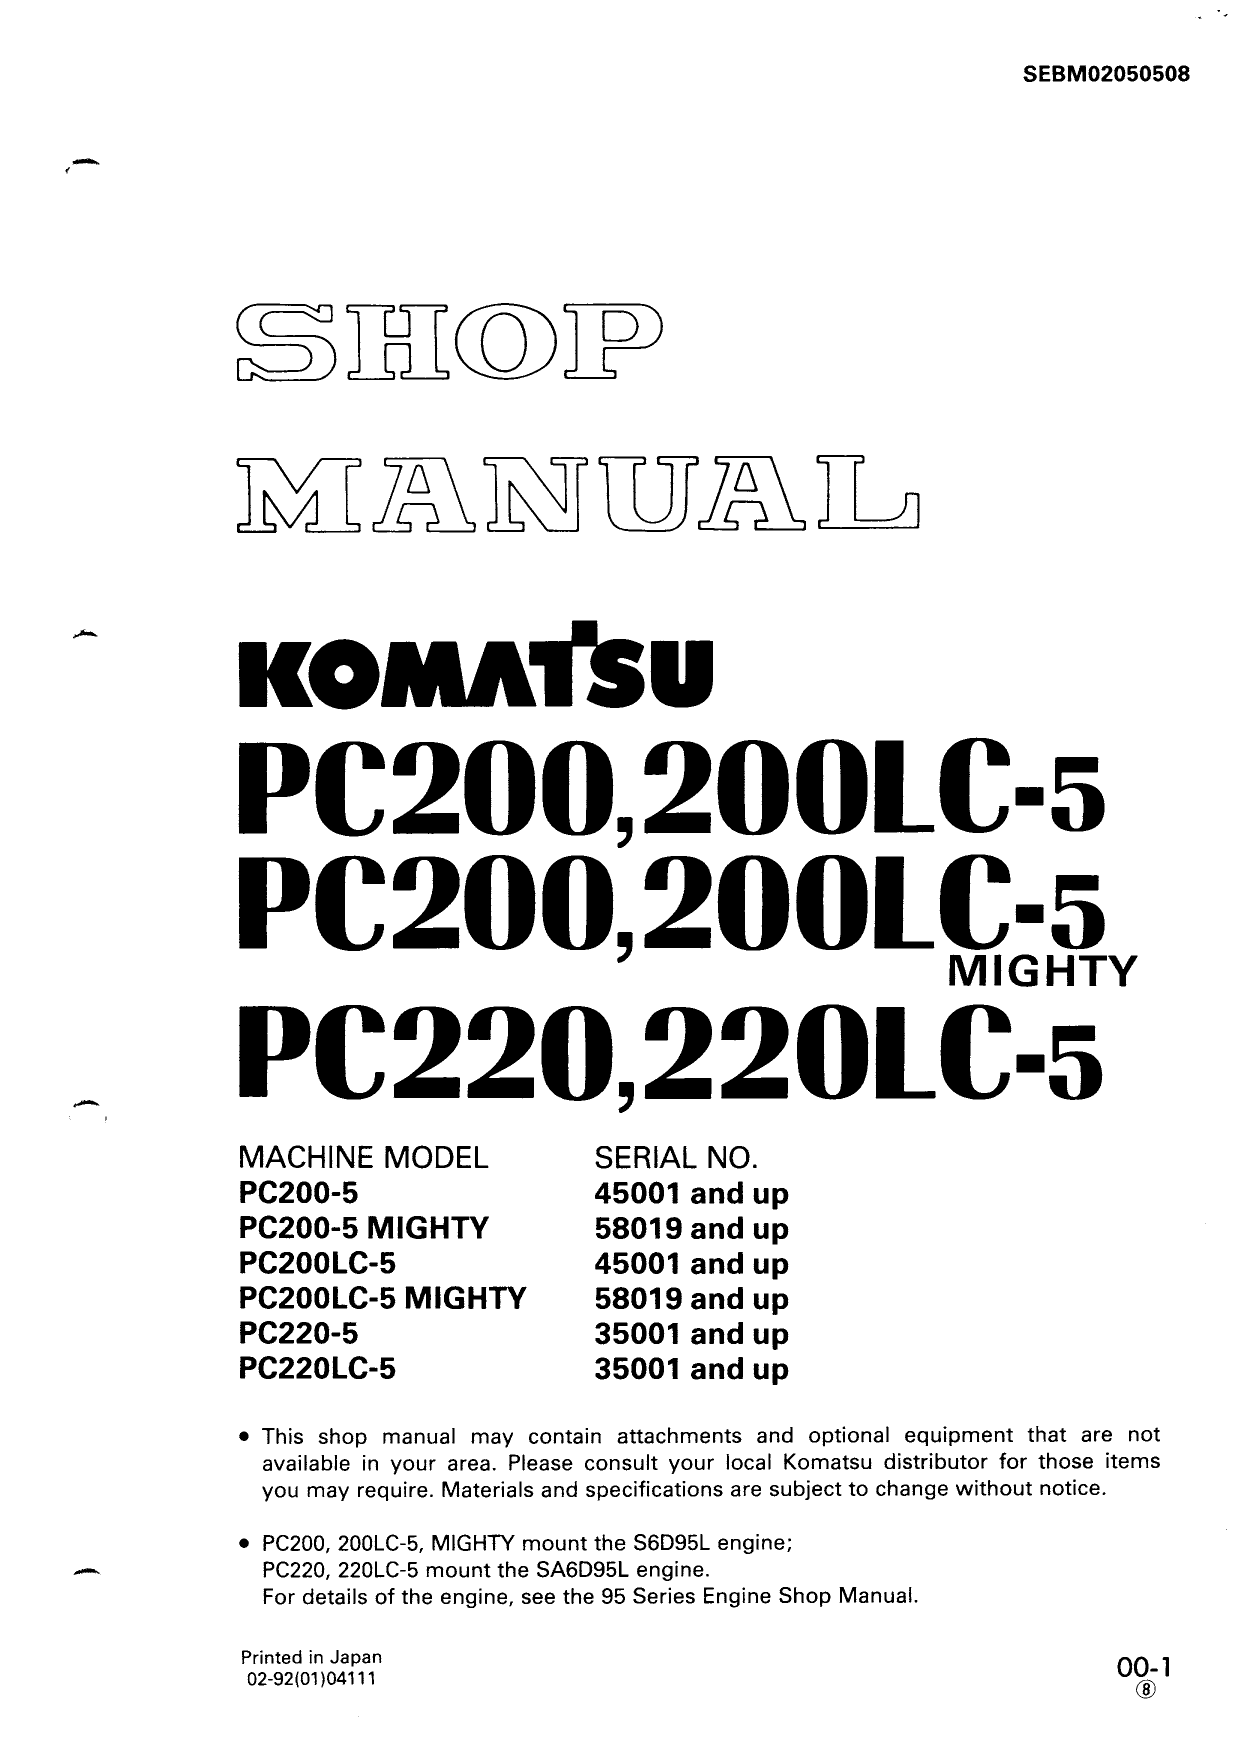 1989-2010 Komatsu PC200-5, PC200-5 Mighty, PC200LC-5, PC200LC-5 Mighty, PC220-5, PC220LC-5 hydraulic excavator shop manual Preview image 6